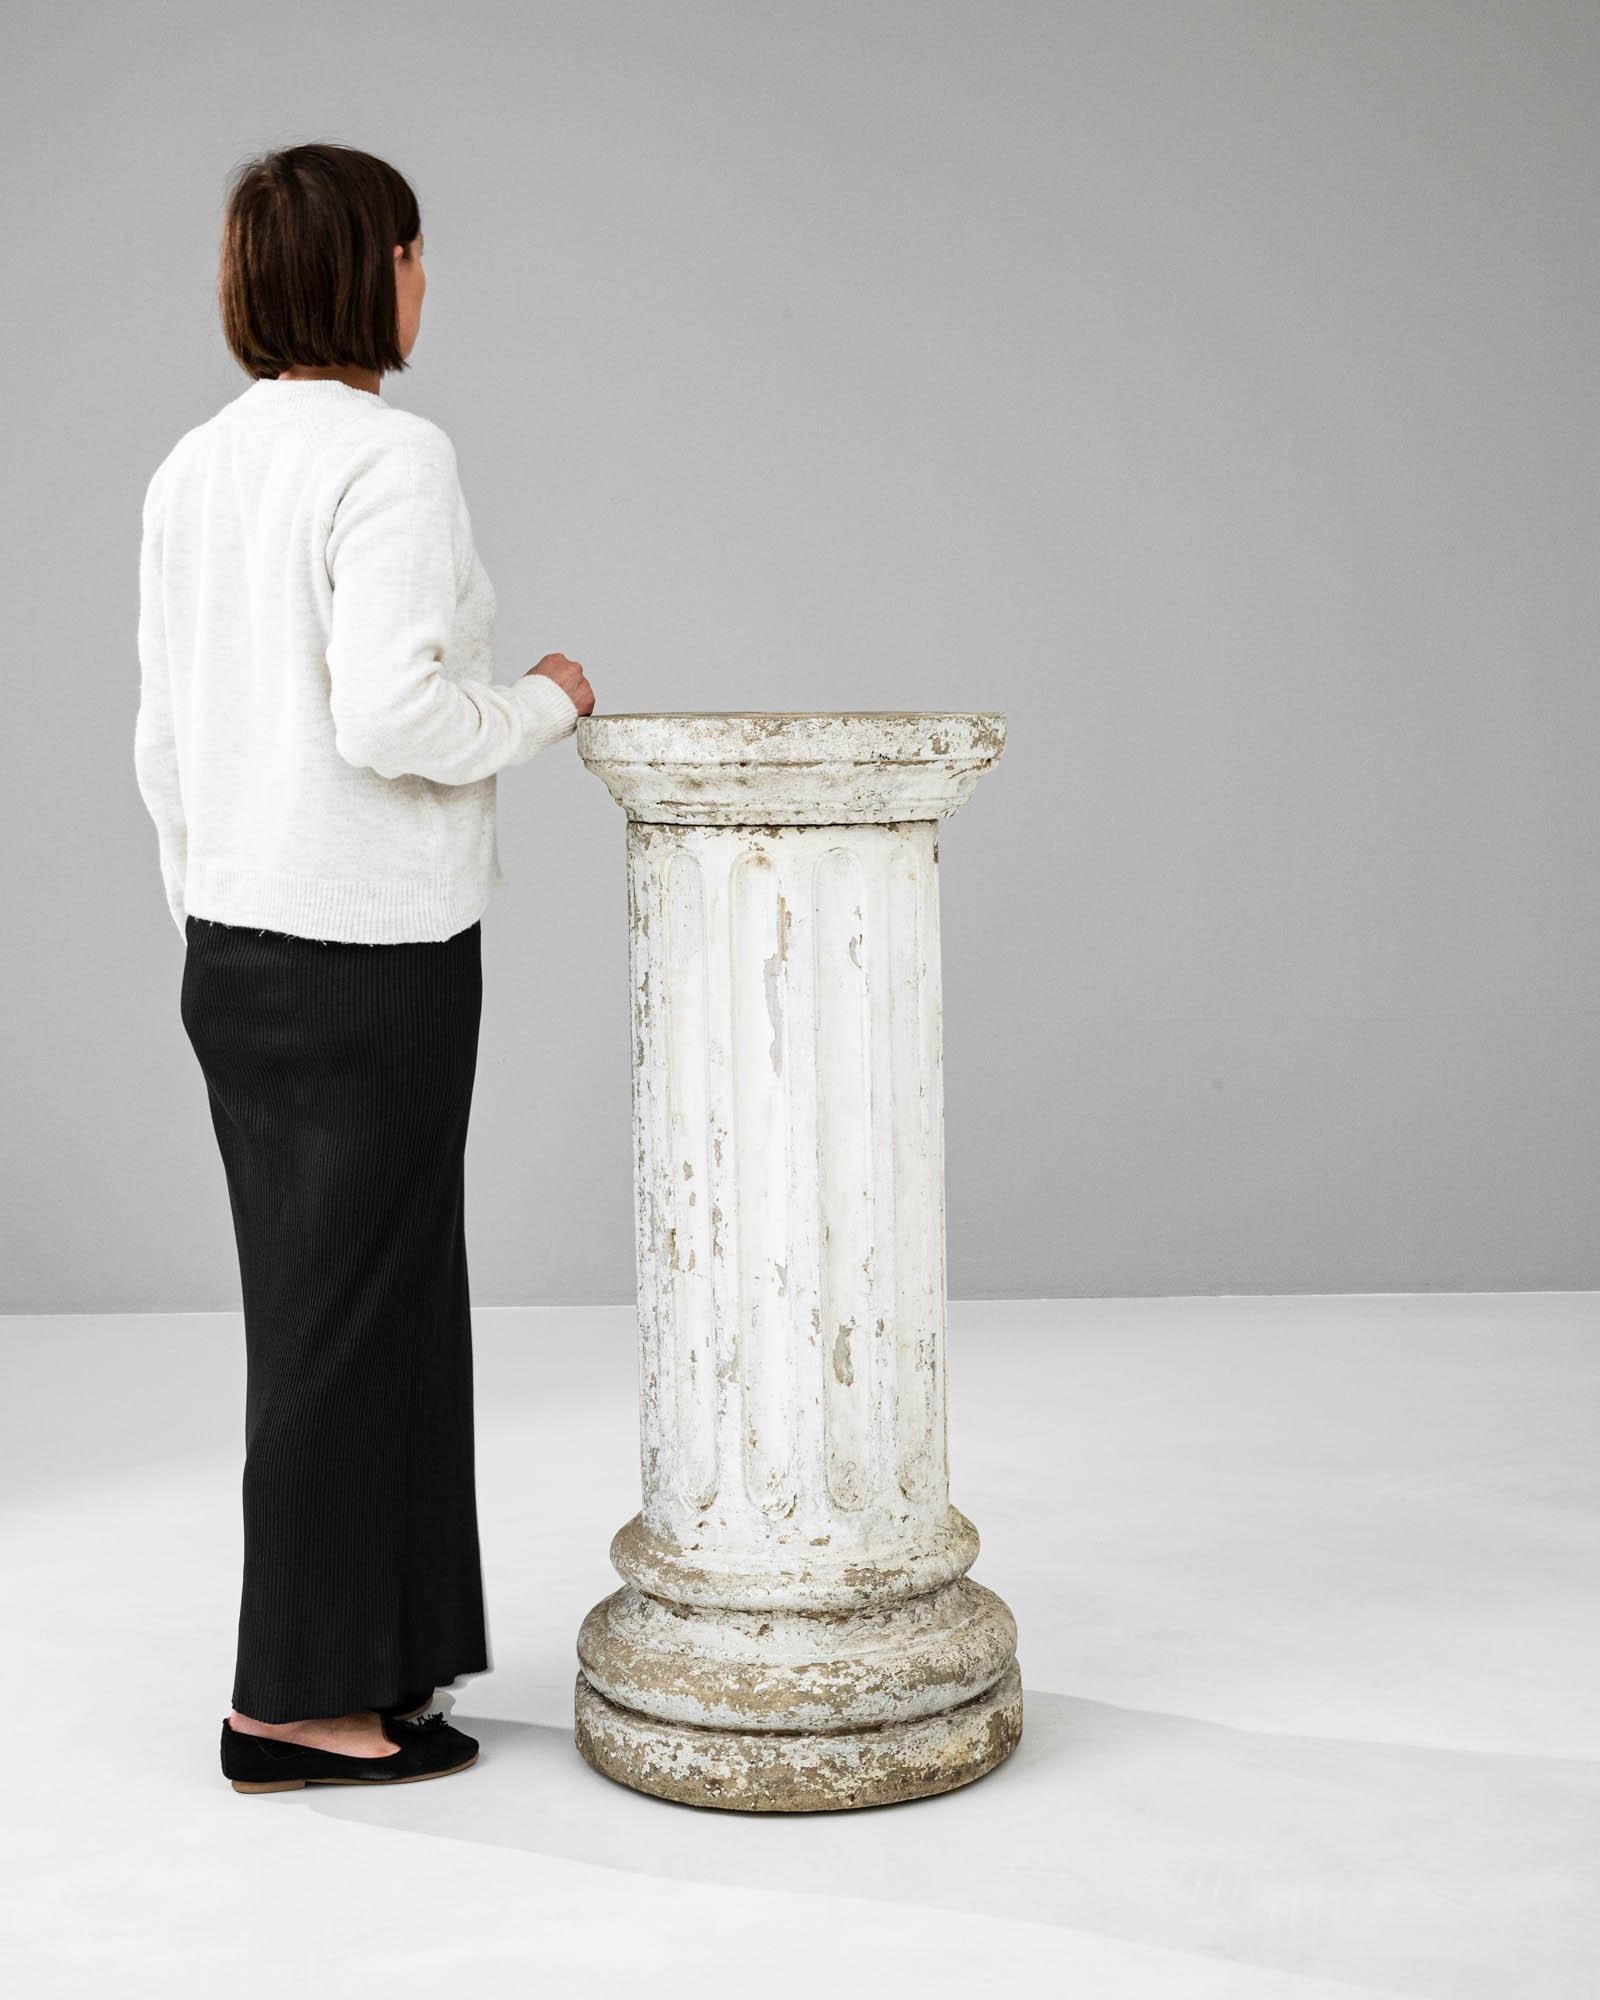 This stately 20th-century French concrete pedestal exudes a timeless elegance and a sense of architectural heritage. With its classical fluted design and robust, round base, it evokes the grandeur of ancient columns while displaying the character of